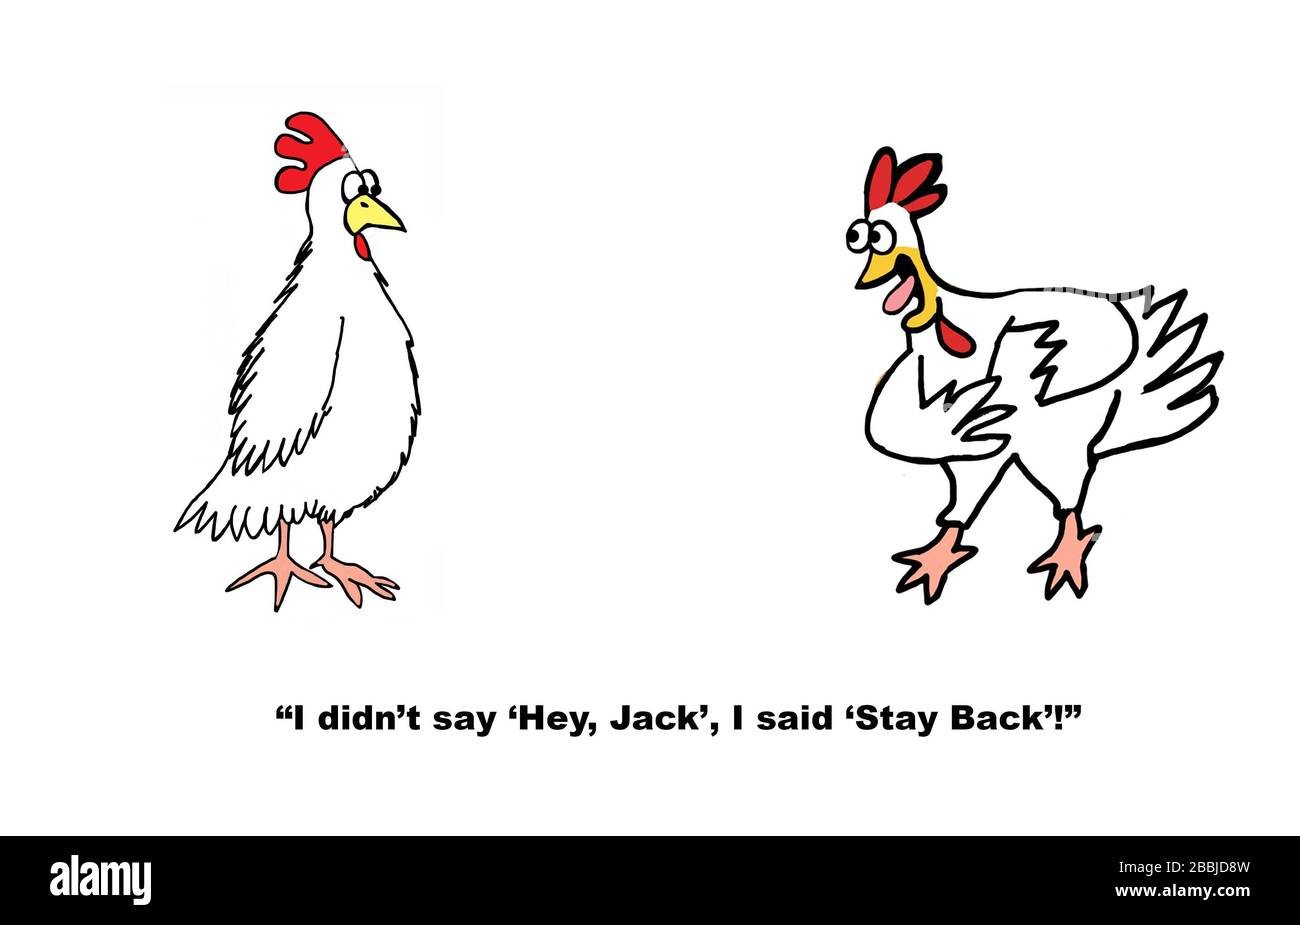 Color cartoon of two chickens depicting social distancing and its importance. Stock Photo